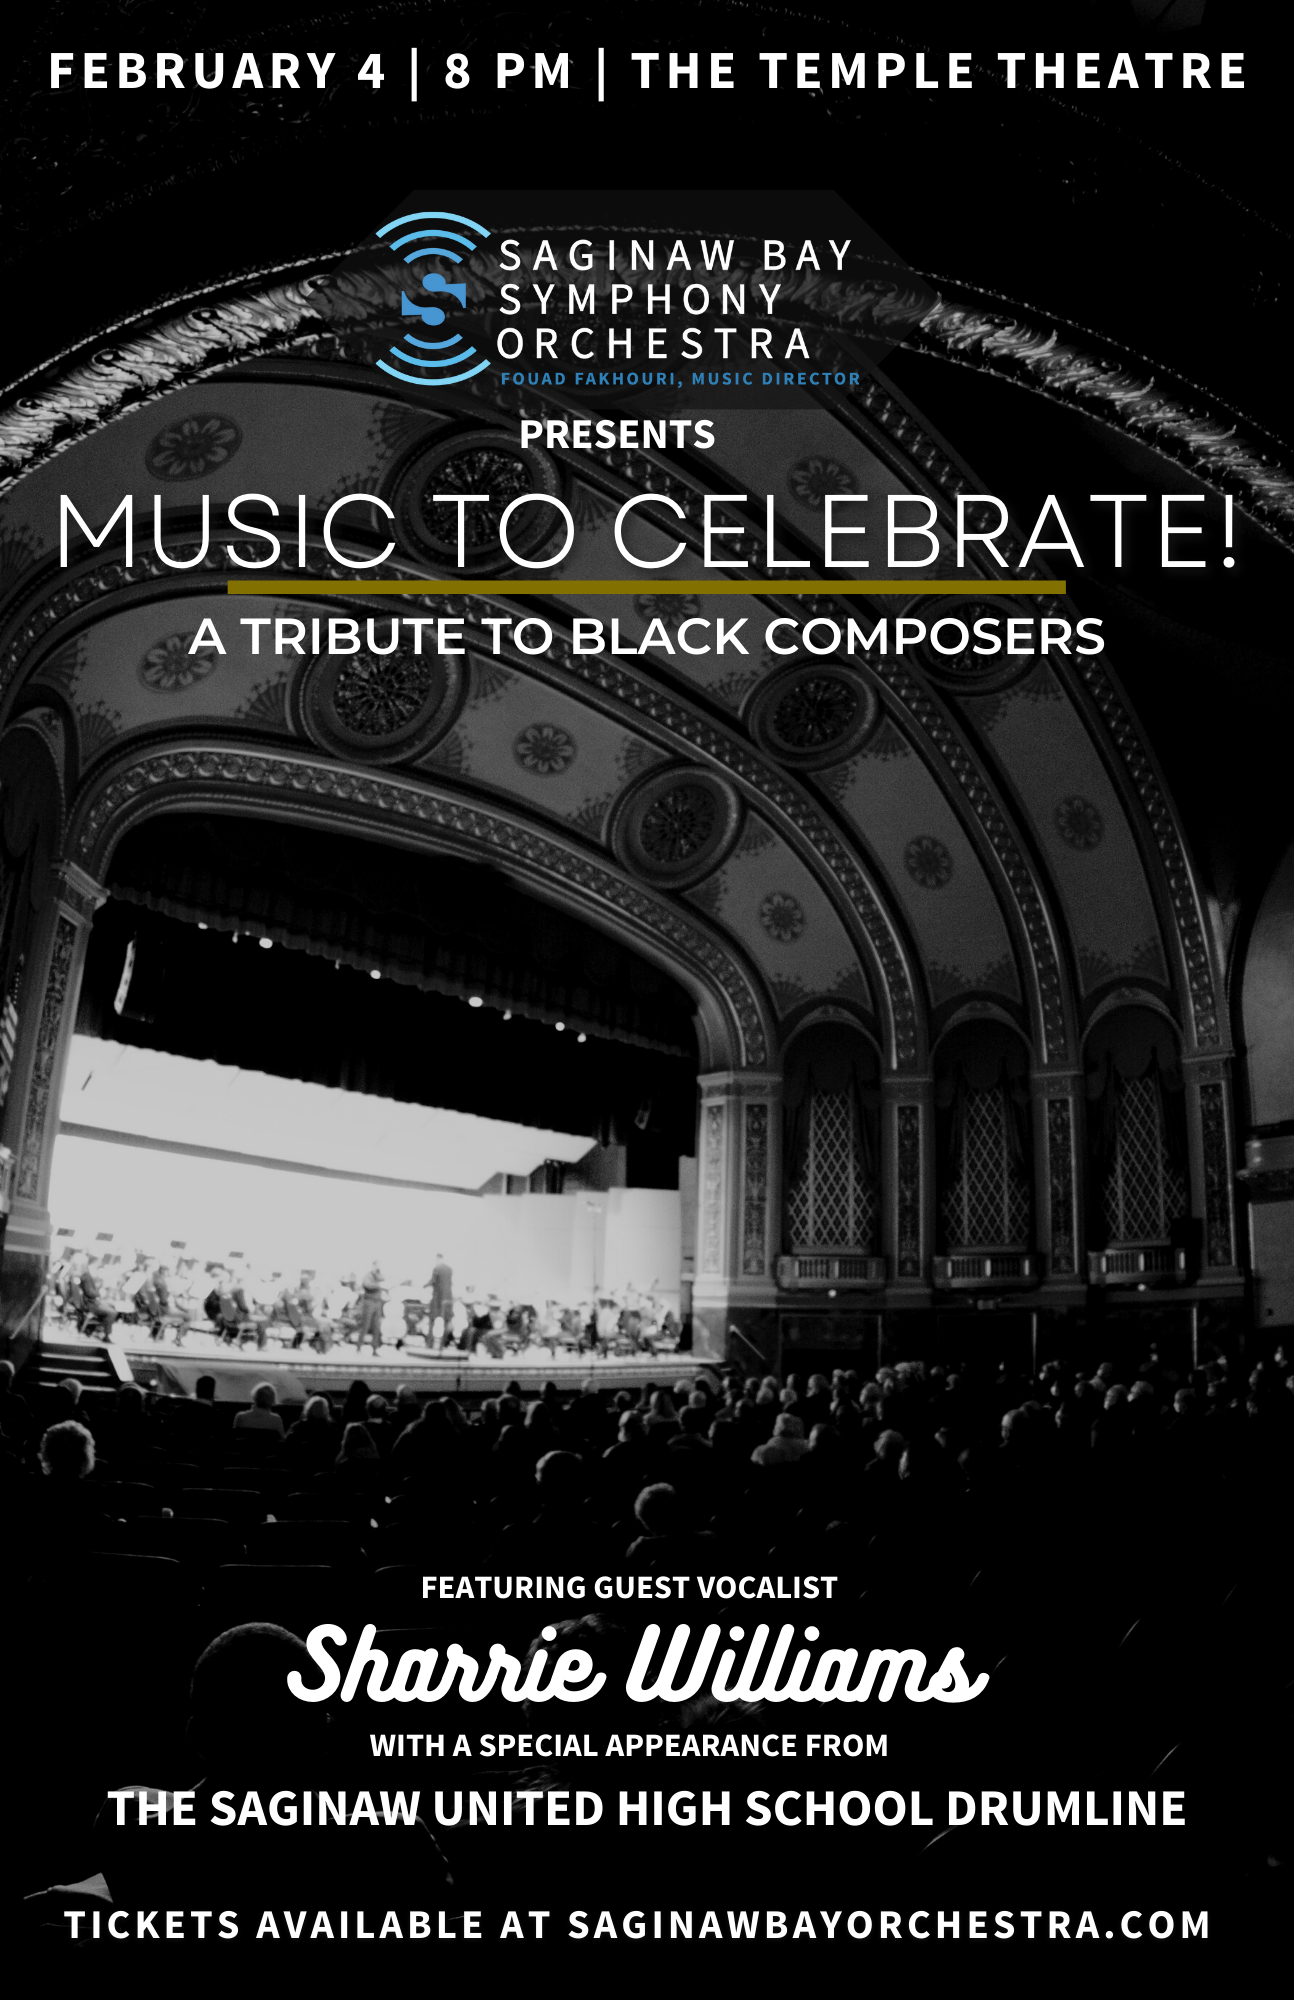 <h1 class="tribe-events-single-event-title">Saginaw Bay Symphony Orchestra presents: MUSIC TO CELEBRATE! A Tribute To Black Composers</h1>